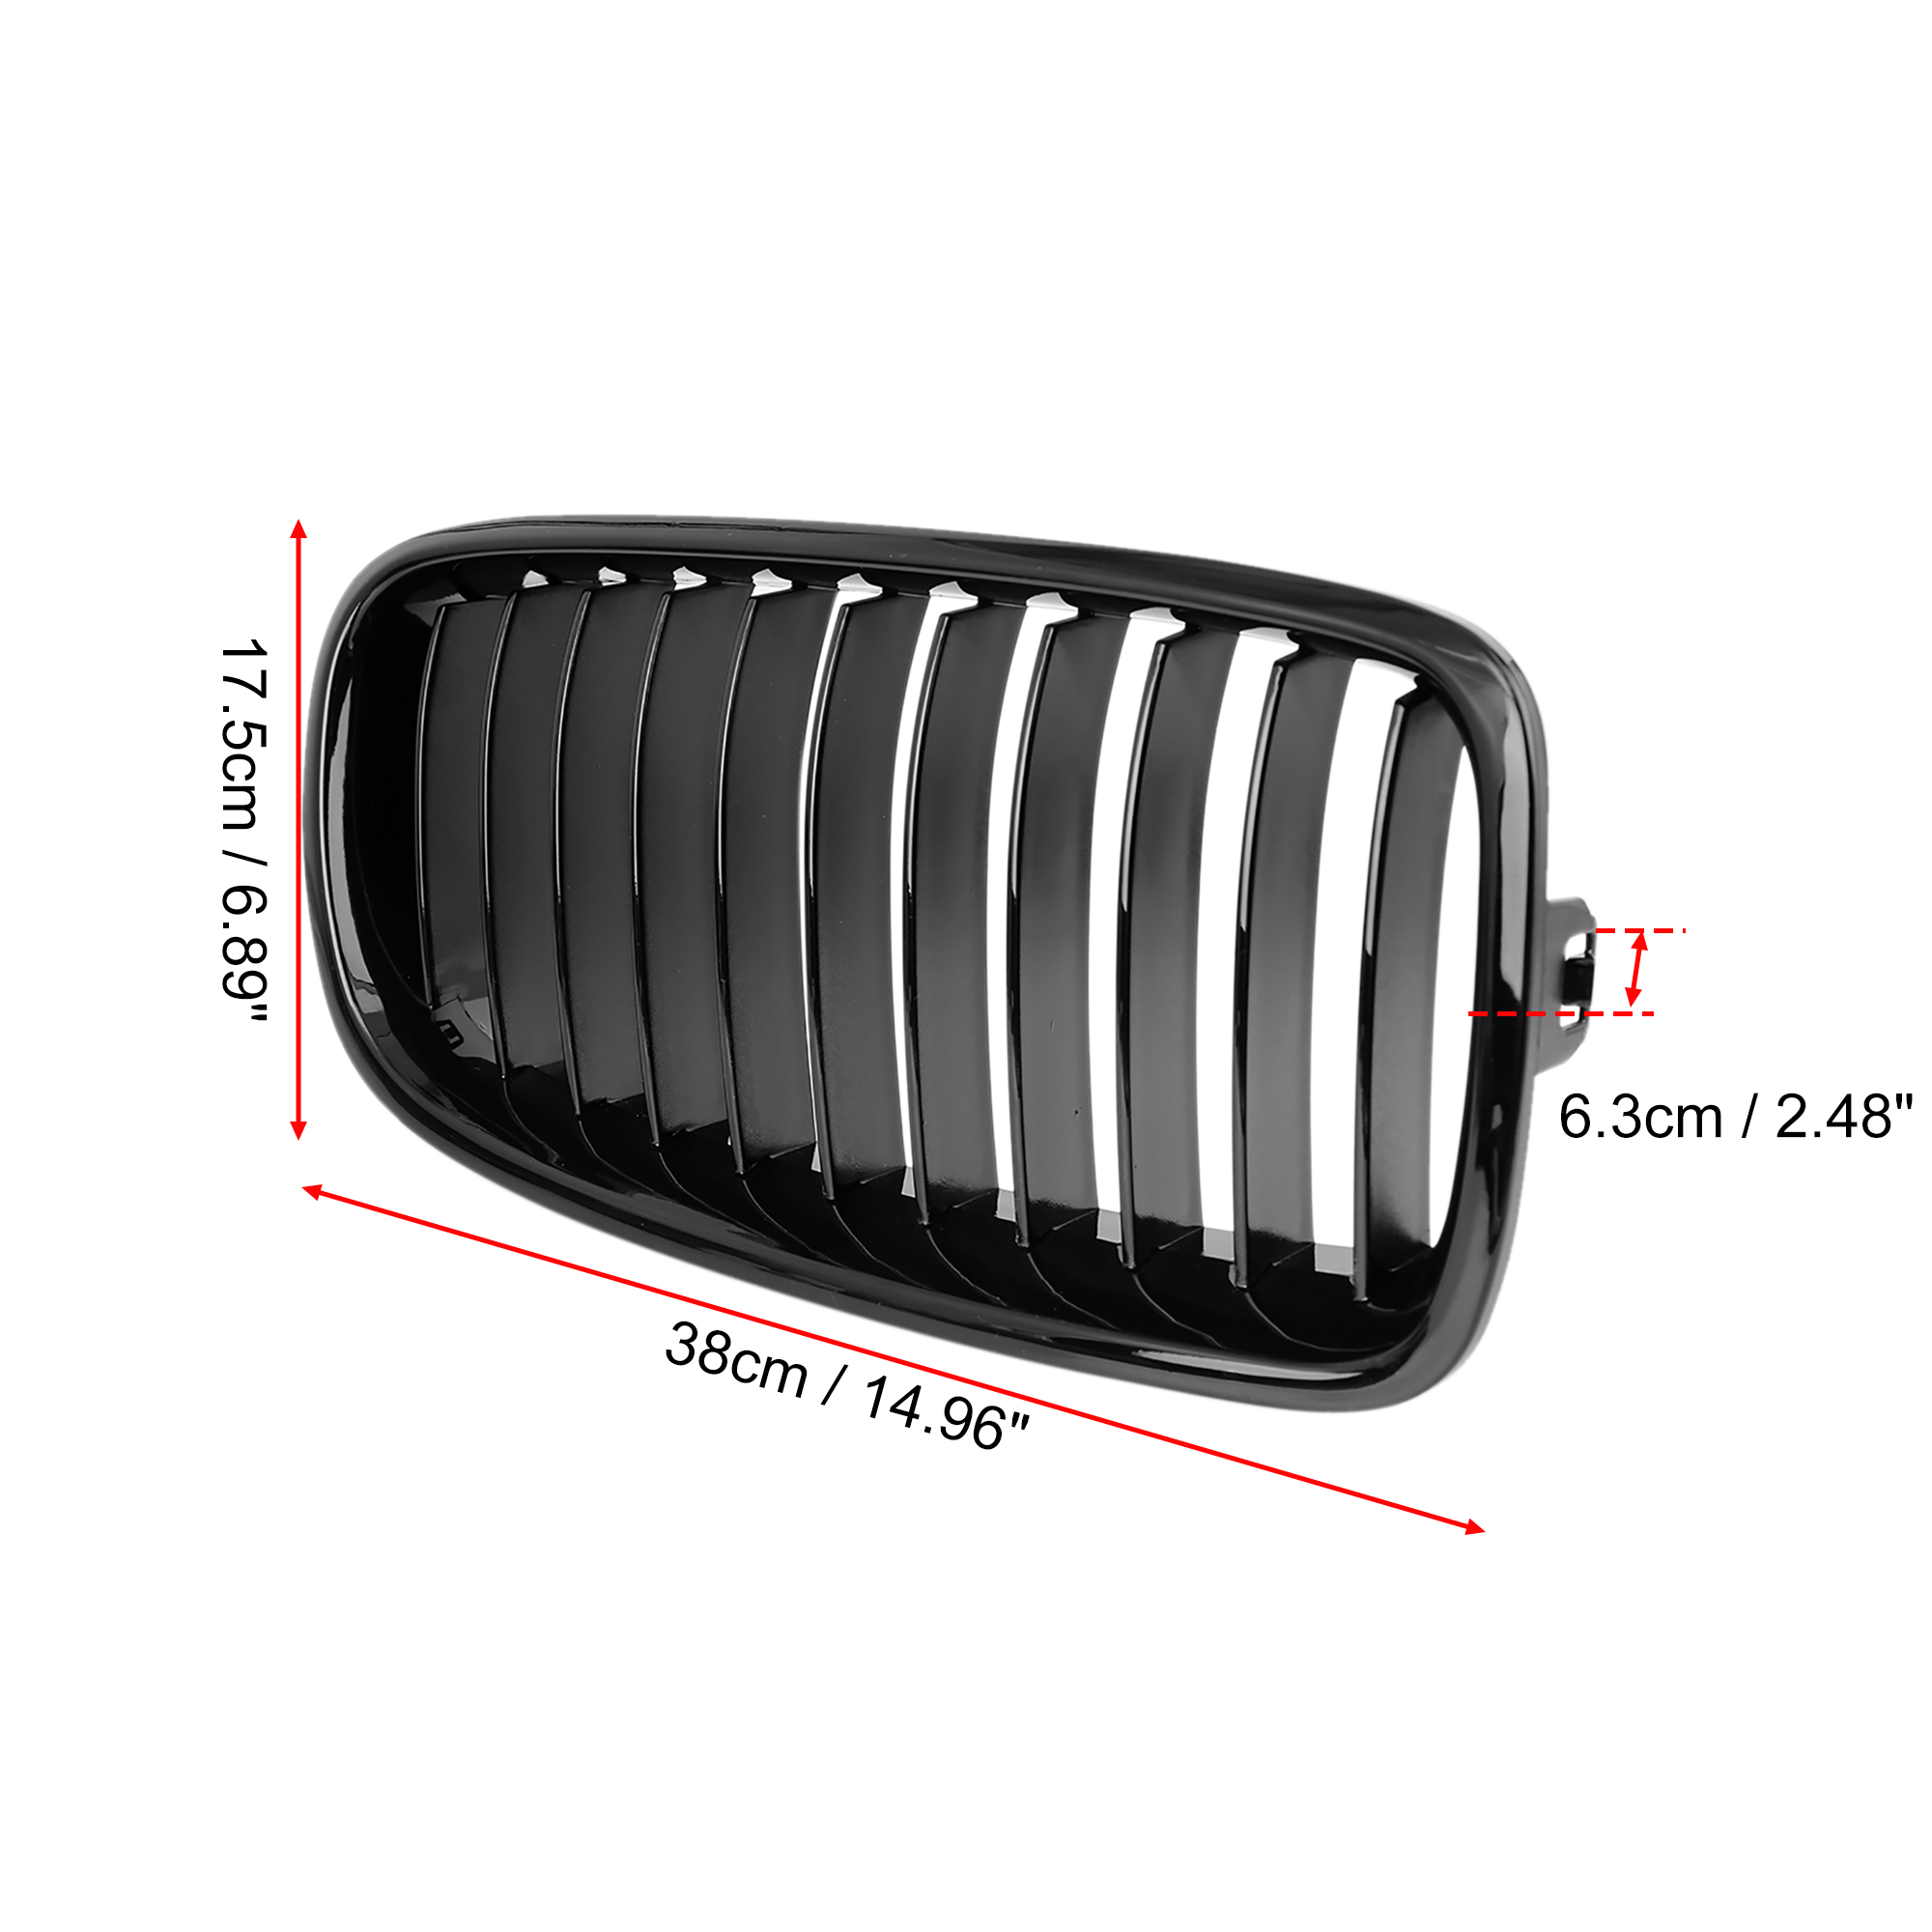 Unique Bargains 2pcs Glossy Black Front Hood Kidney Grille Grill for 2012-2016 BMW F30 4 Doors